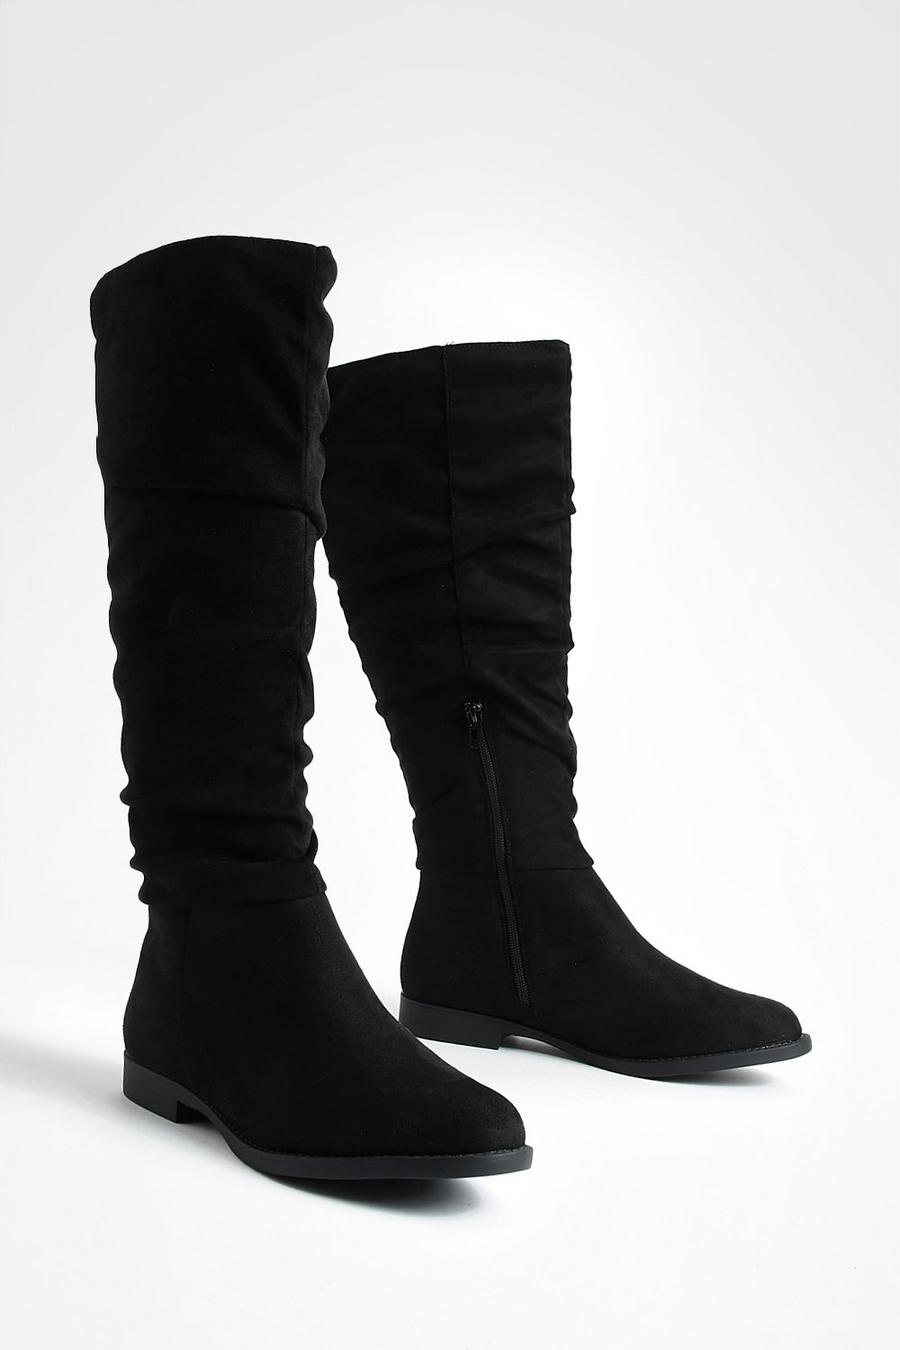 Black Slouchy Knee High Flat Boots